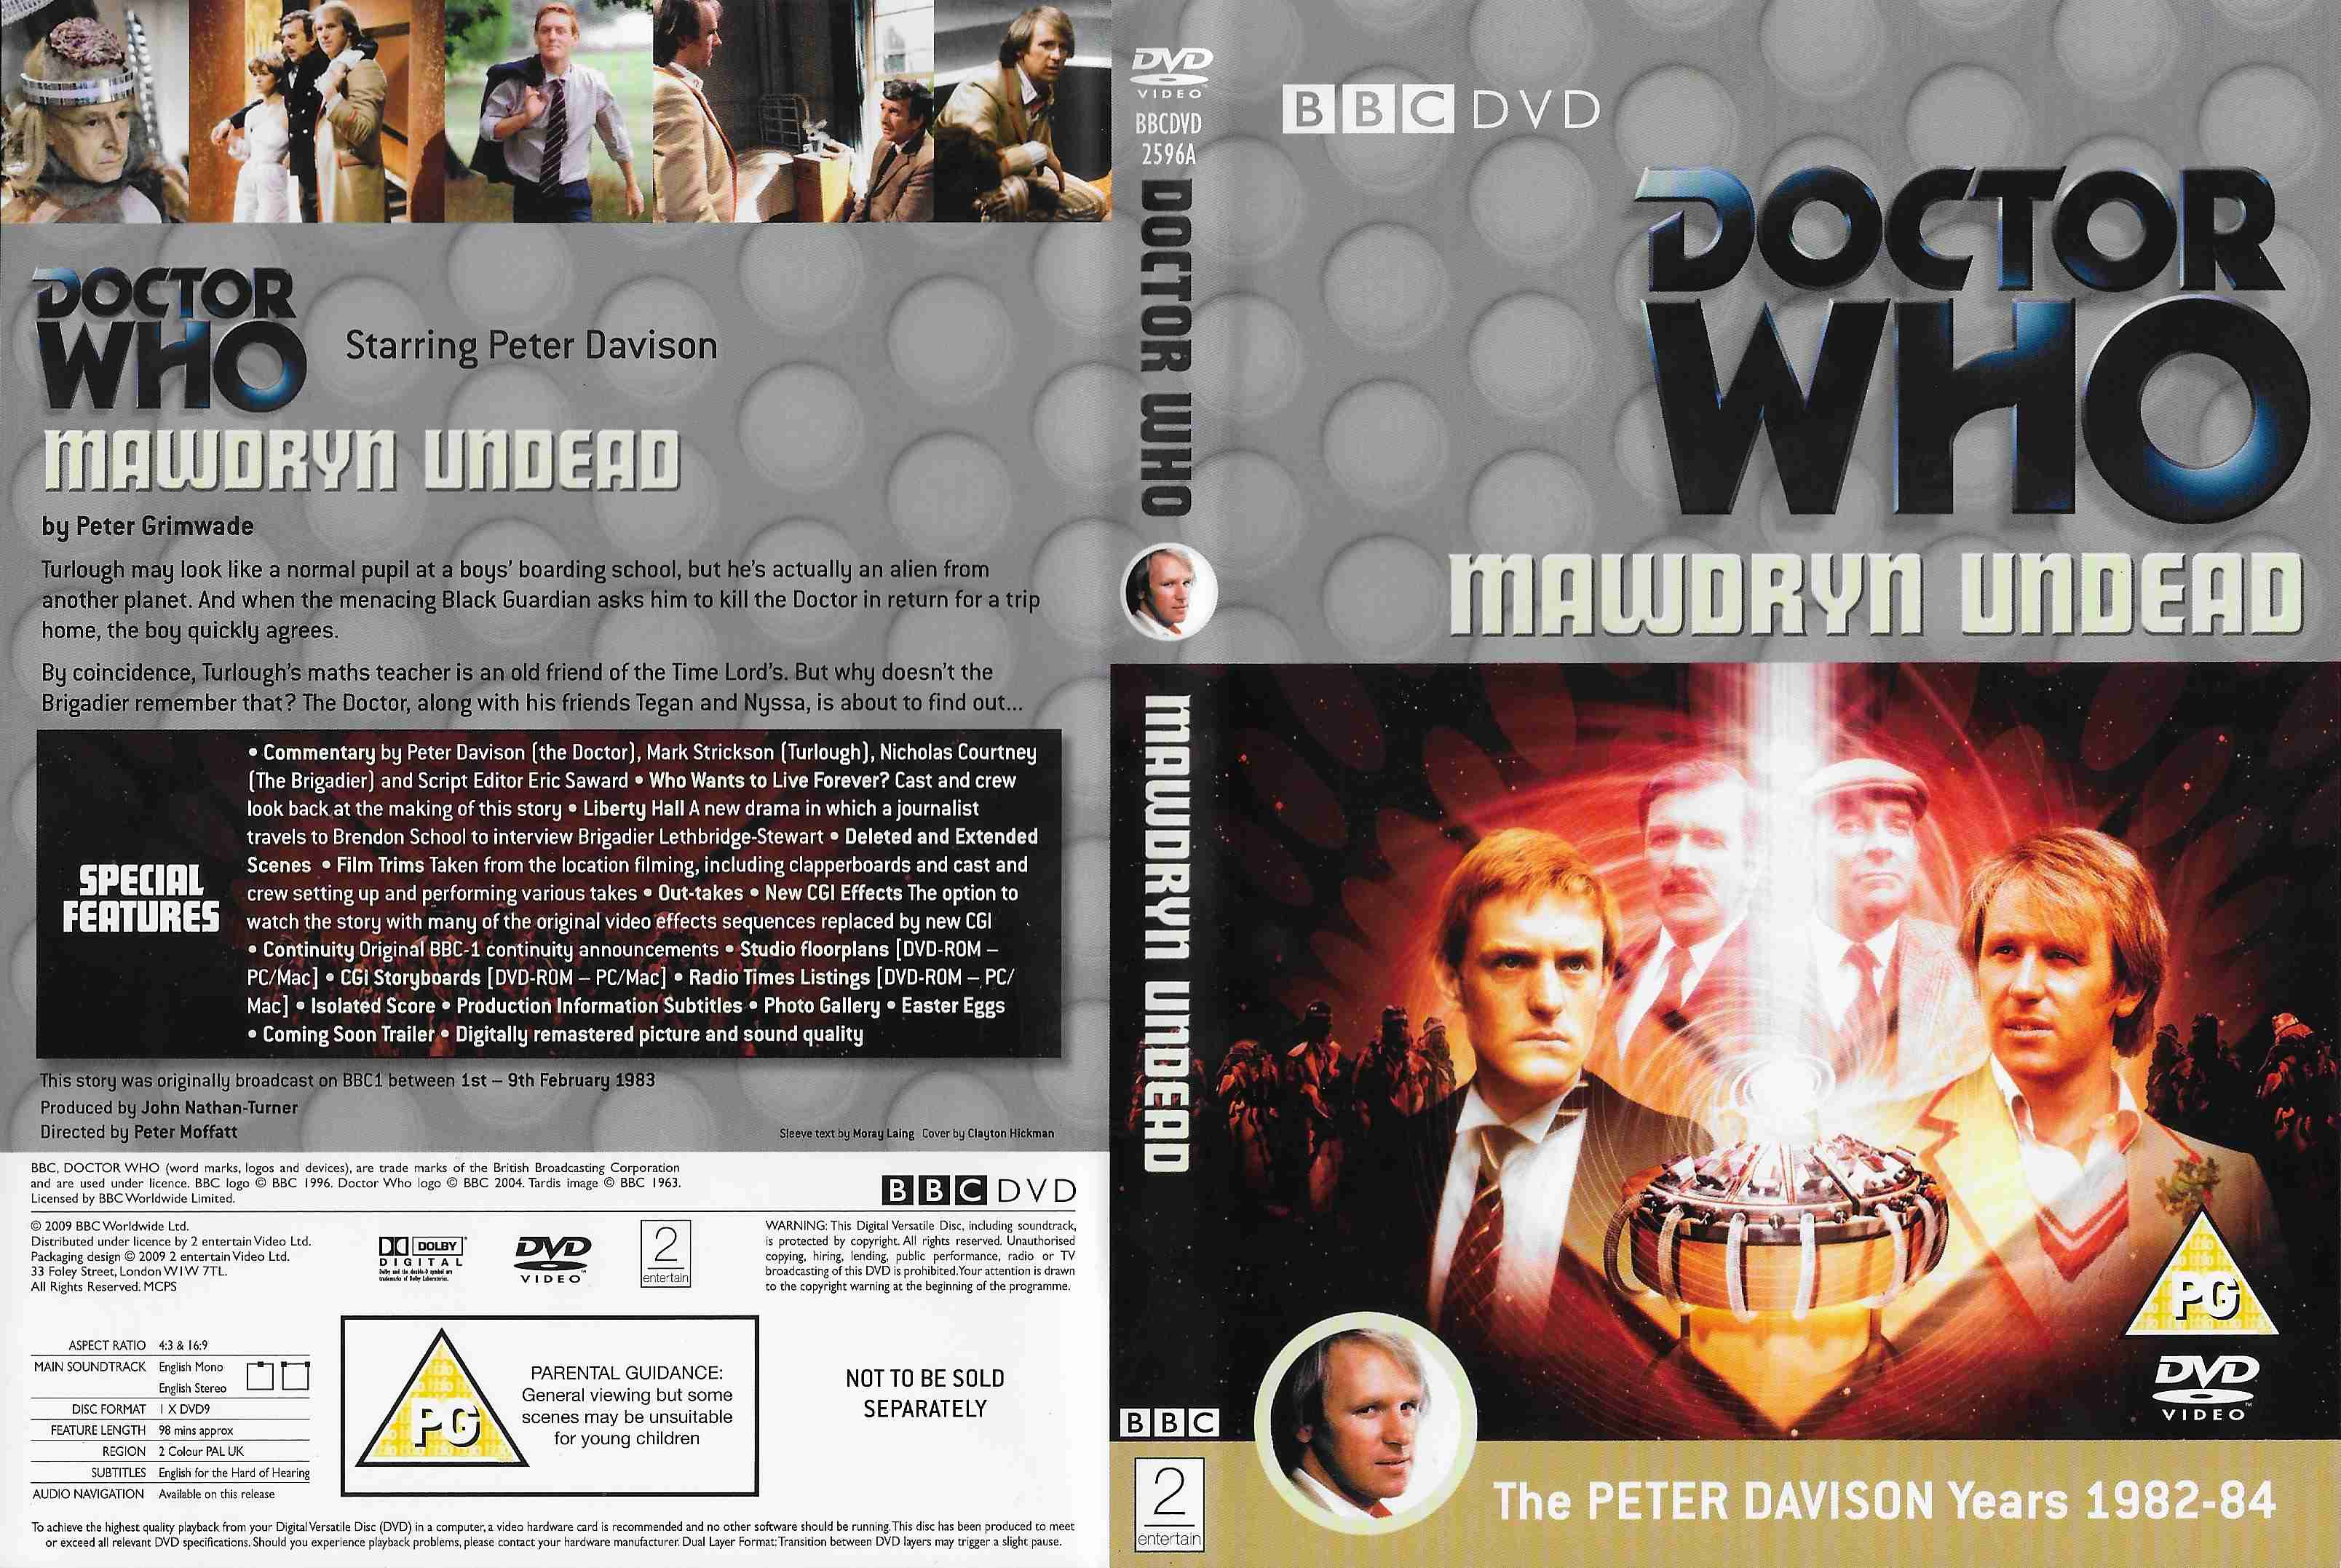 Picture of BBCDVD 2596A Doctor Who - Mawdryn Undead by artist Peter Grimwade from the BBC records and Tapes library